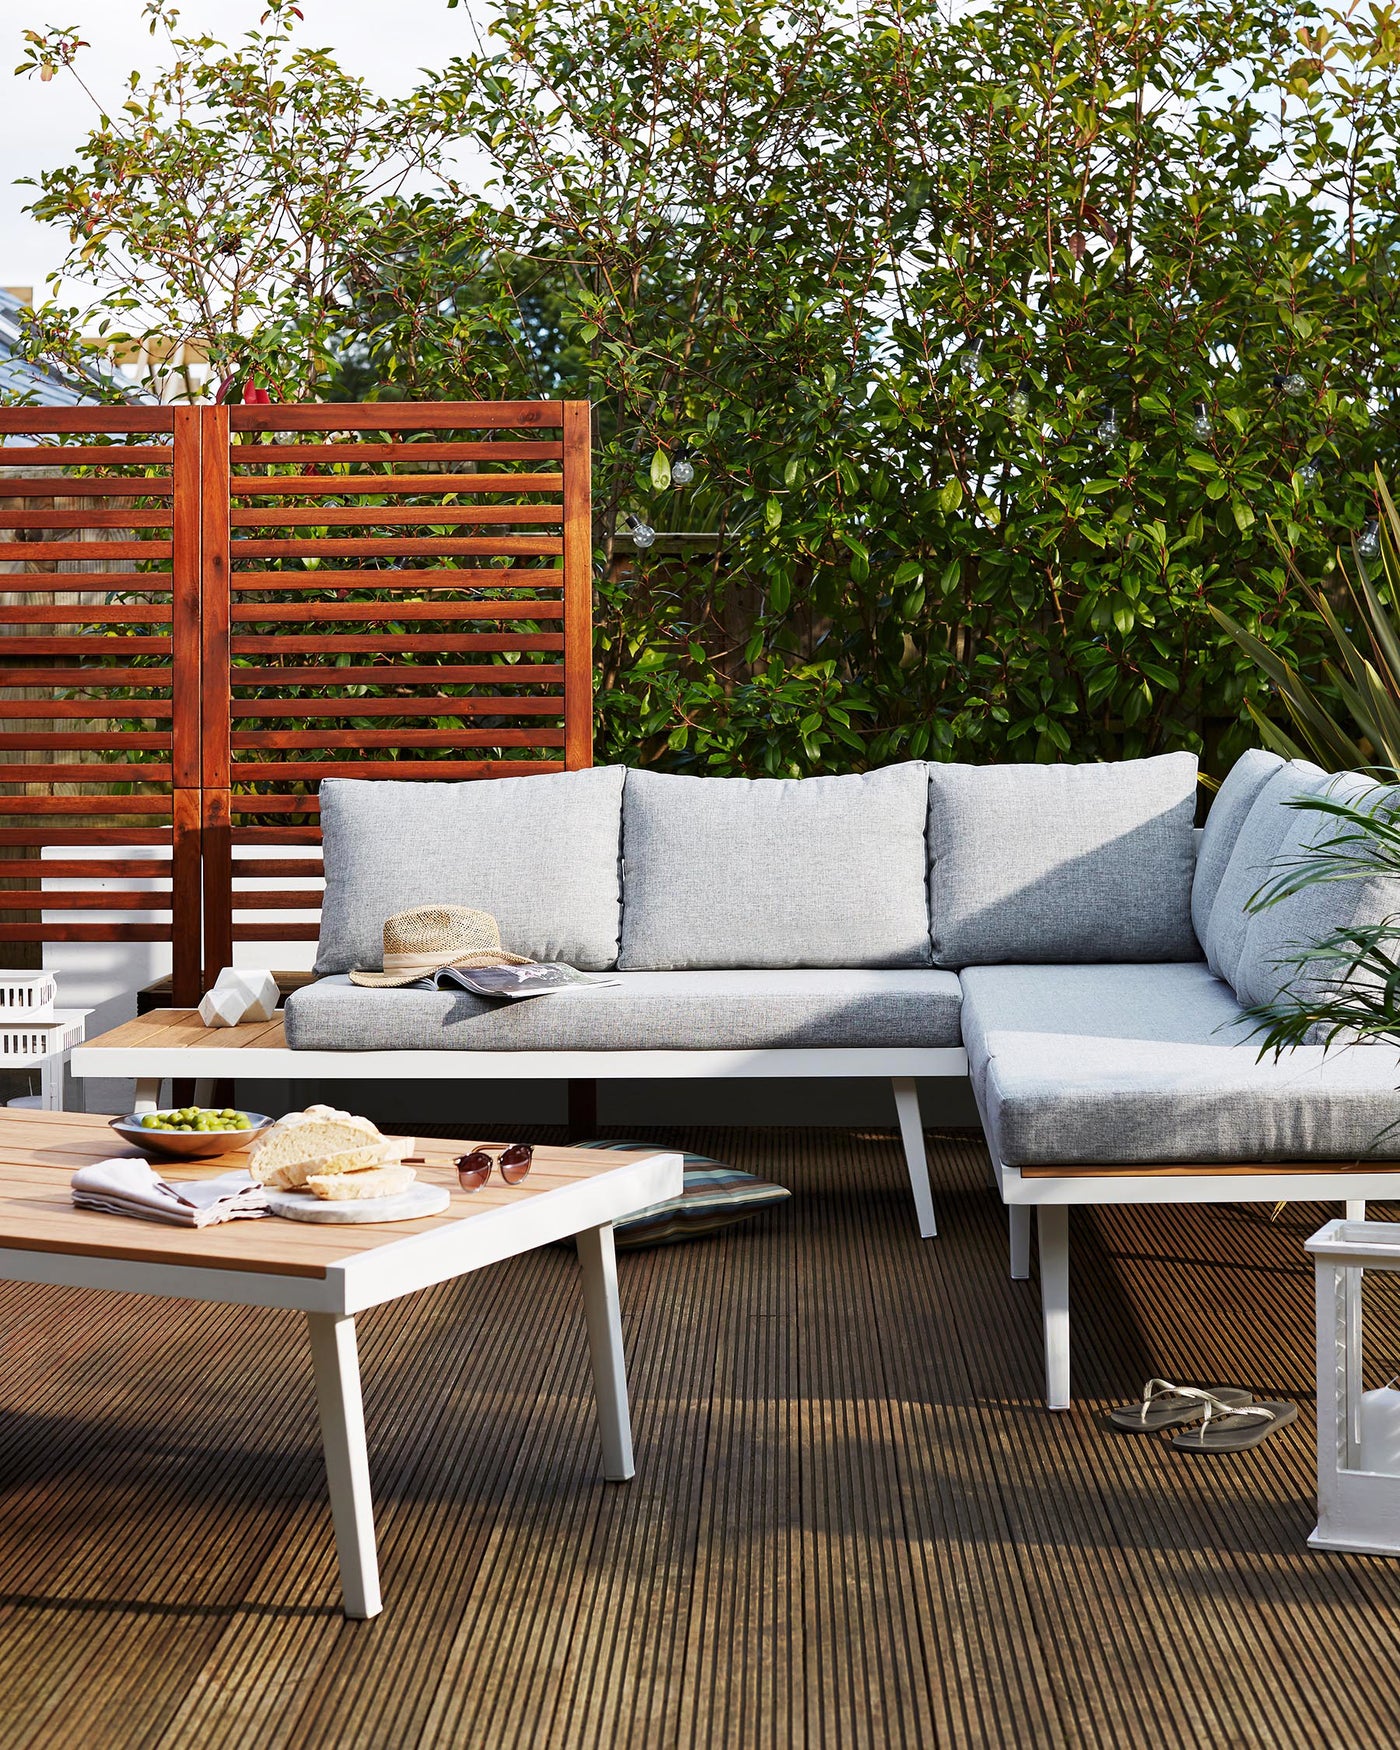 Outdoor corner sofa set with light grey cushions, a white and wooden rectangular coffee table, and two white side stools with a slatted design set on a deck with lush greenery in the background.